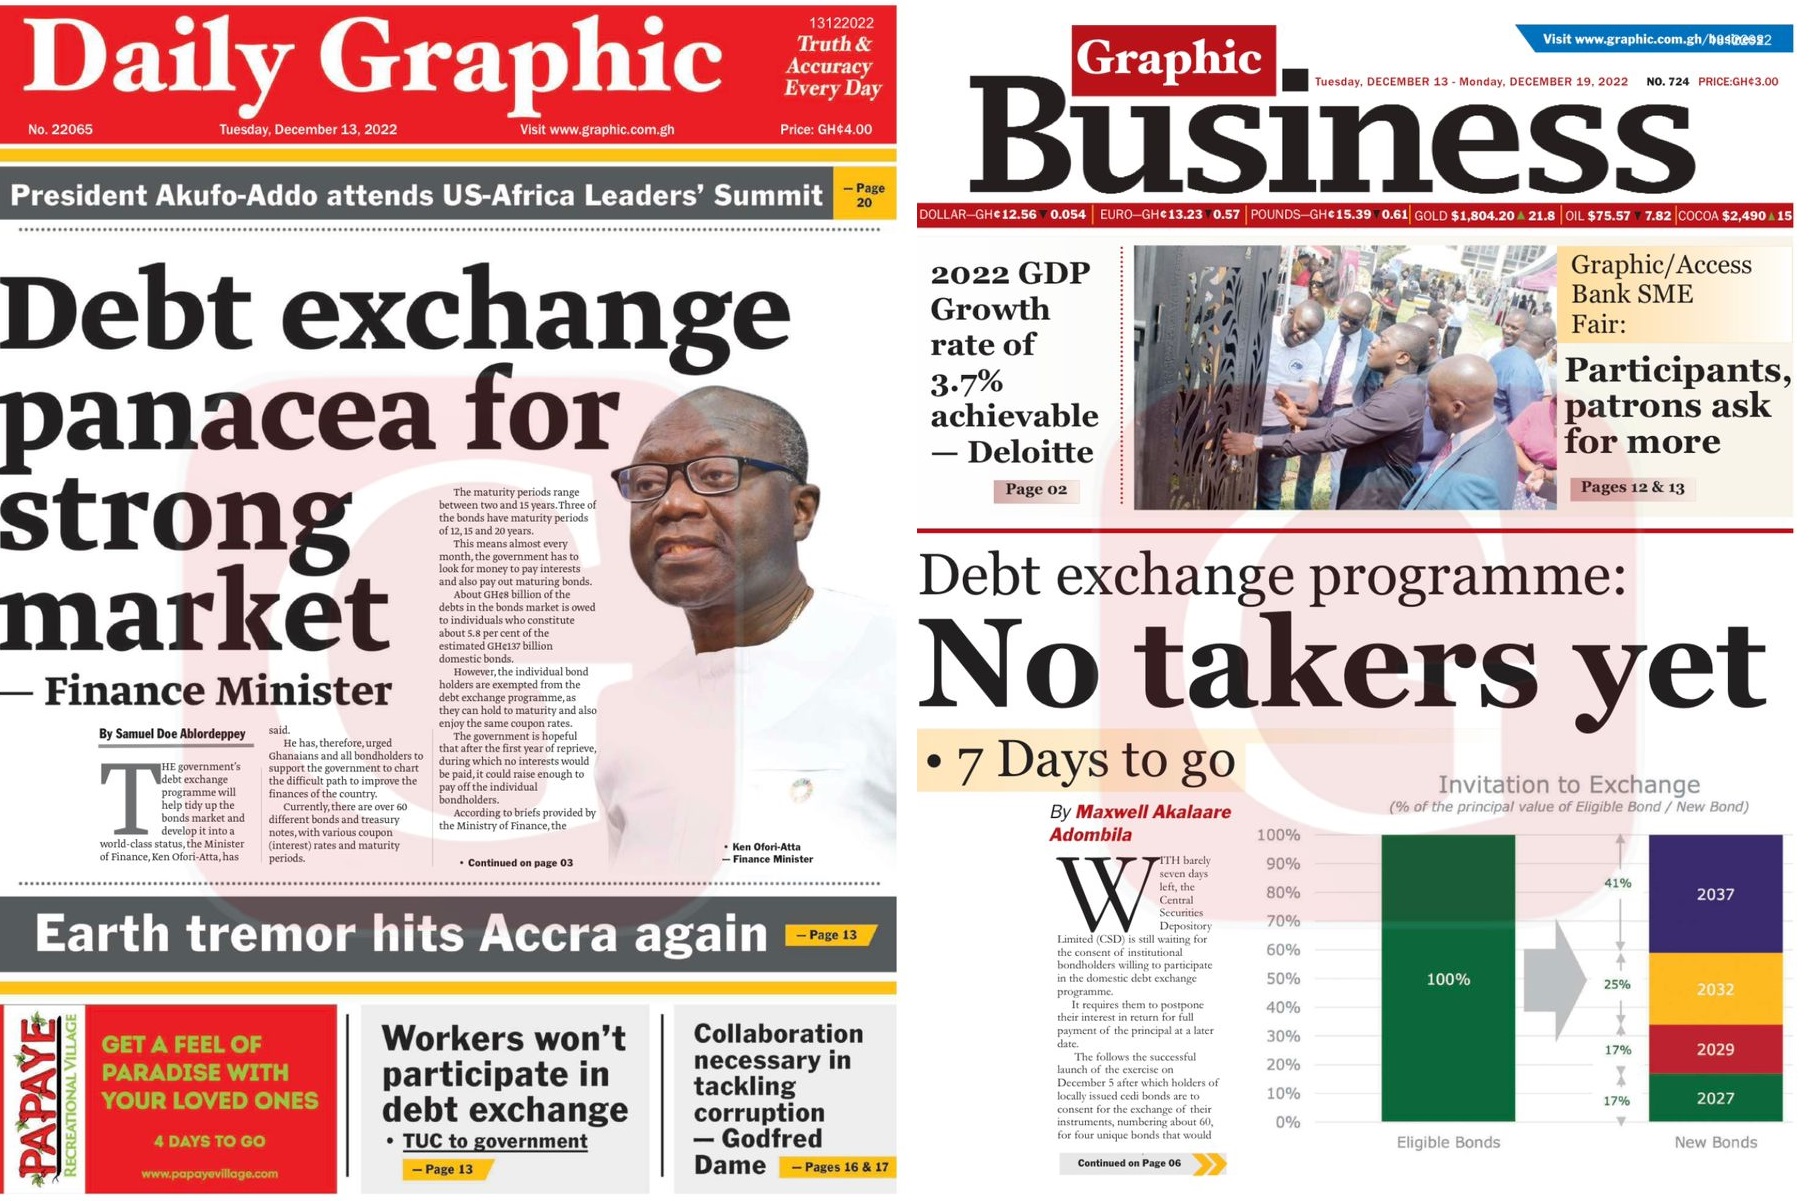 Tuesday’s front pages - Earth Tremor hits Accra again